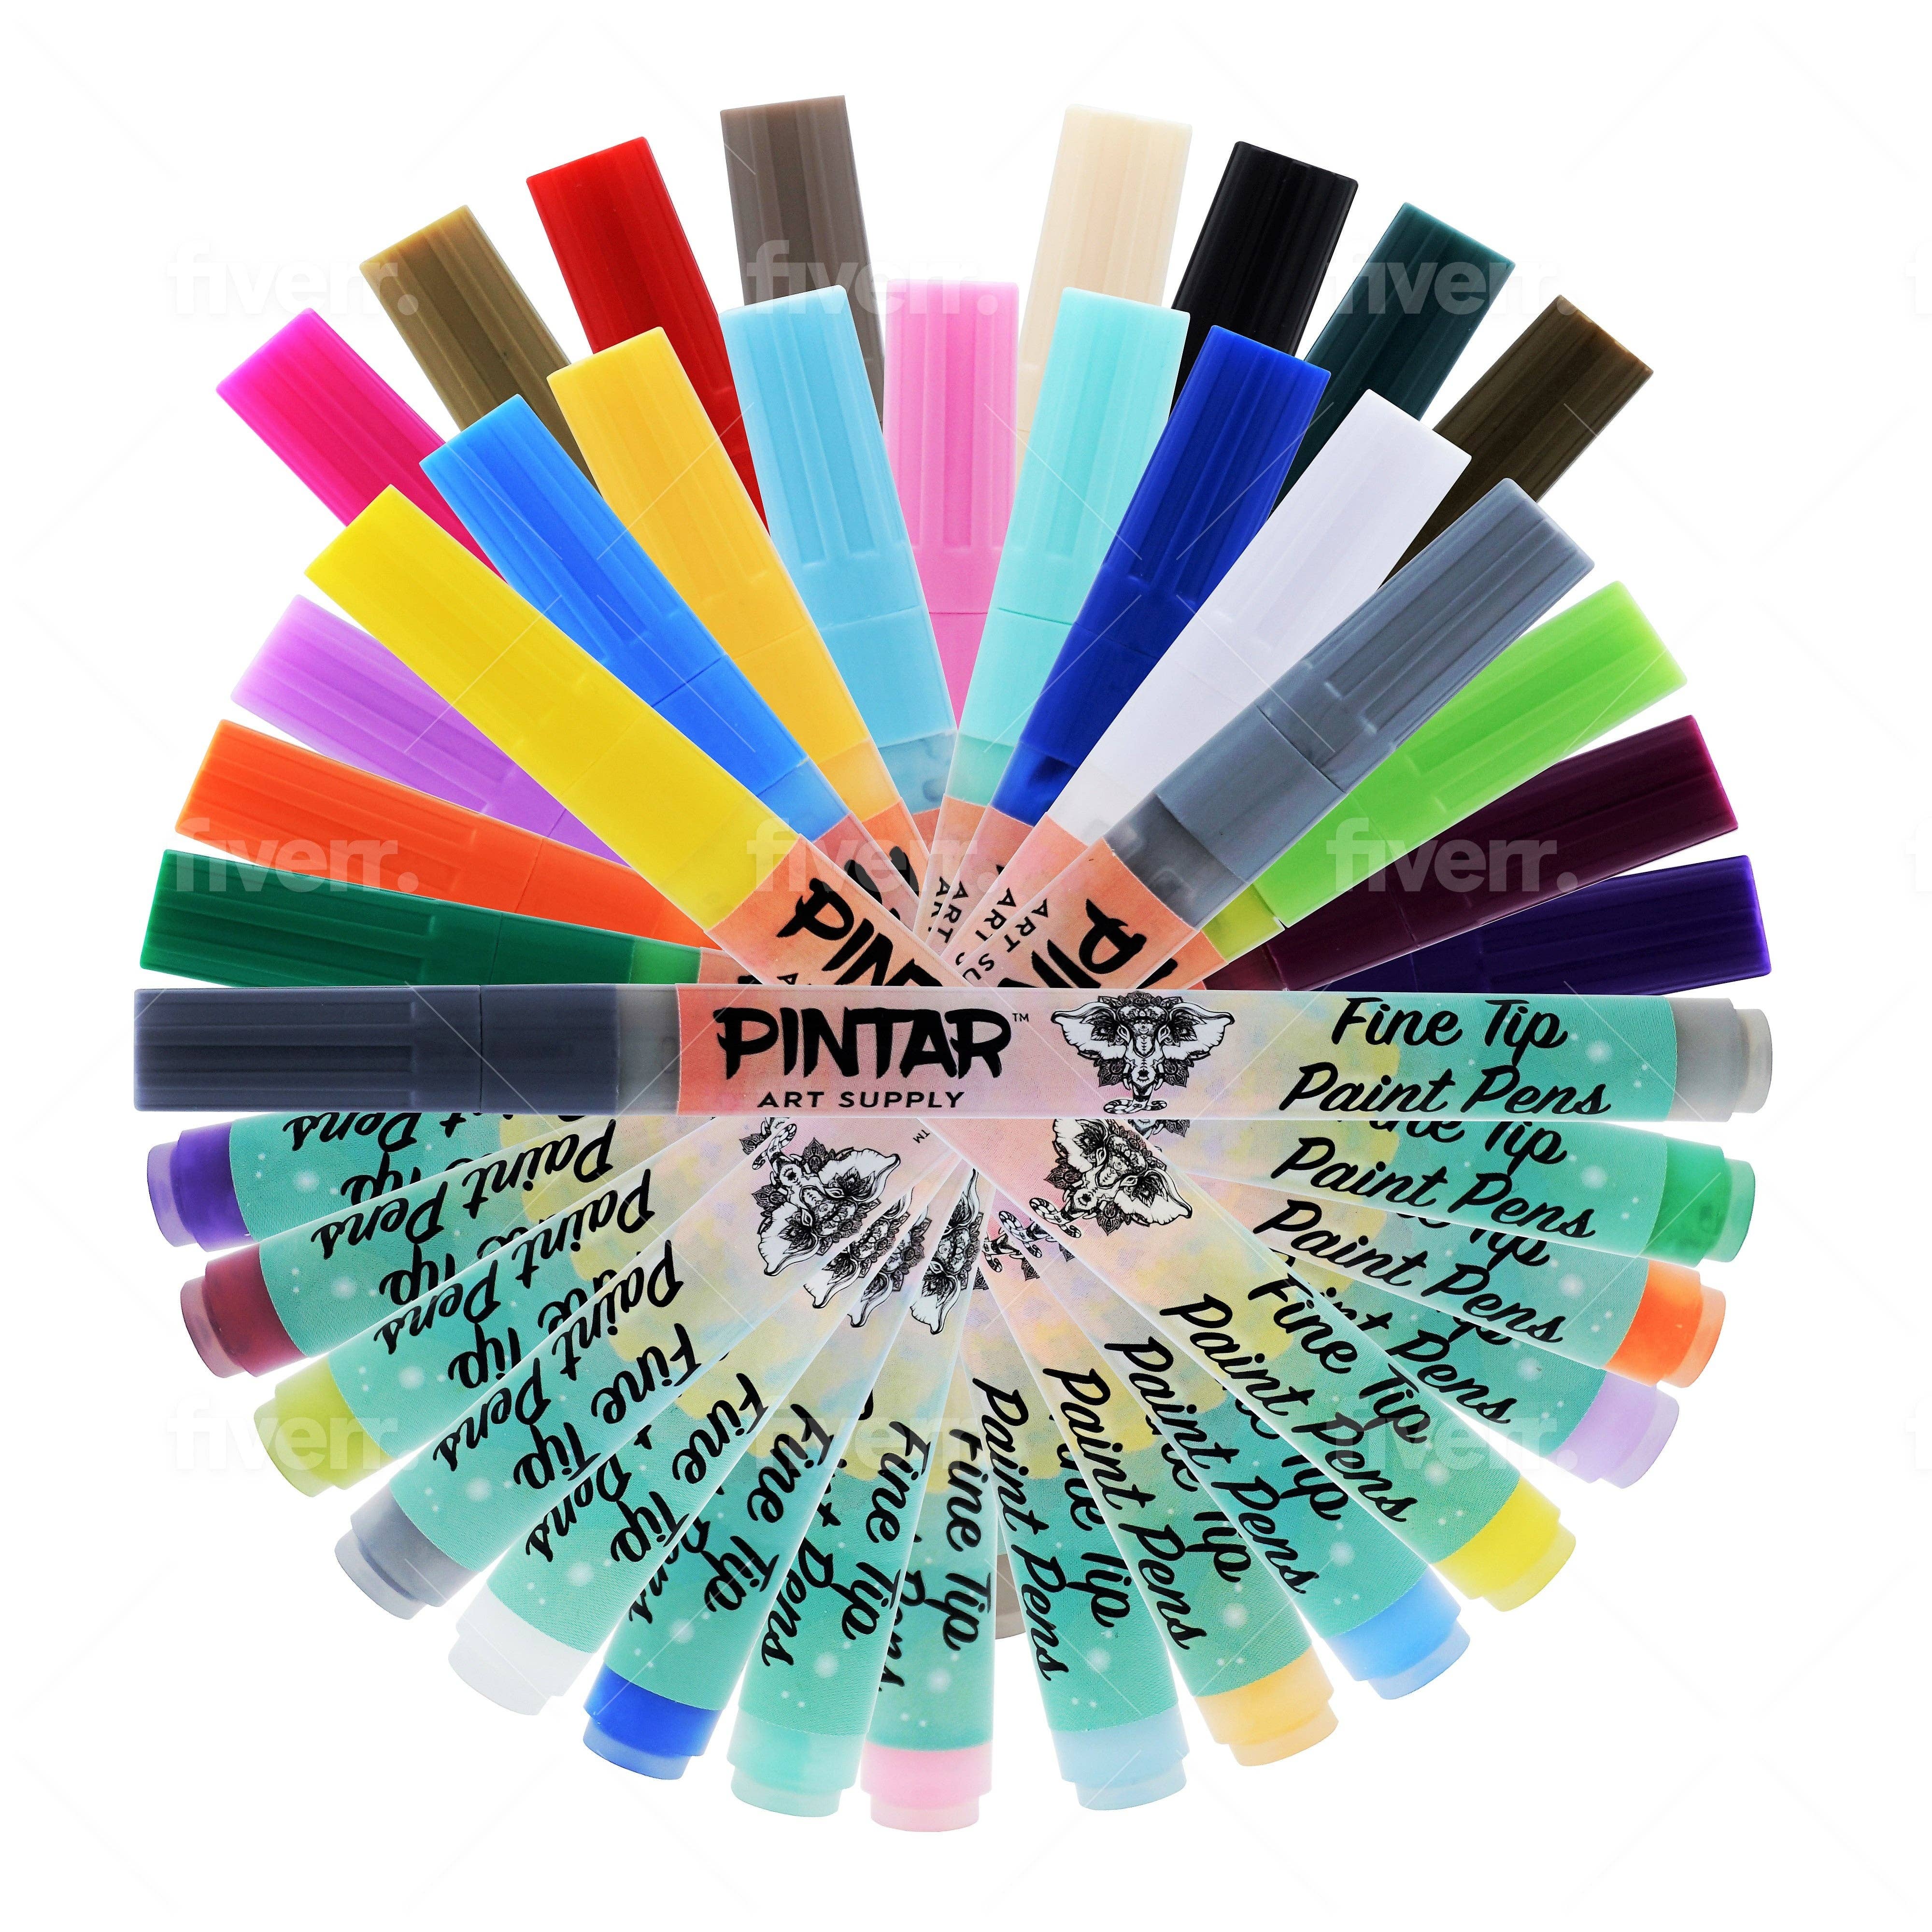 Pintar Acrylic Fine Tip Paint Markers (Includes Metallic Colors) - 24 Pack